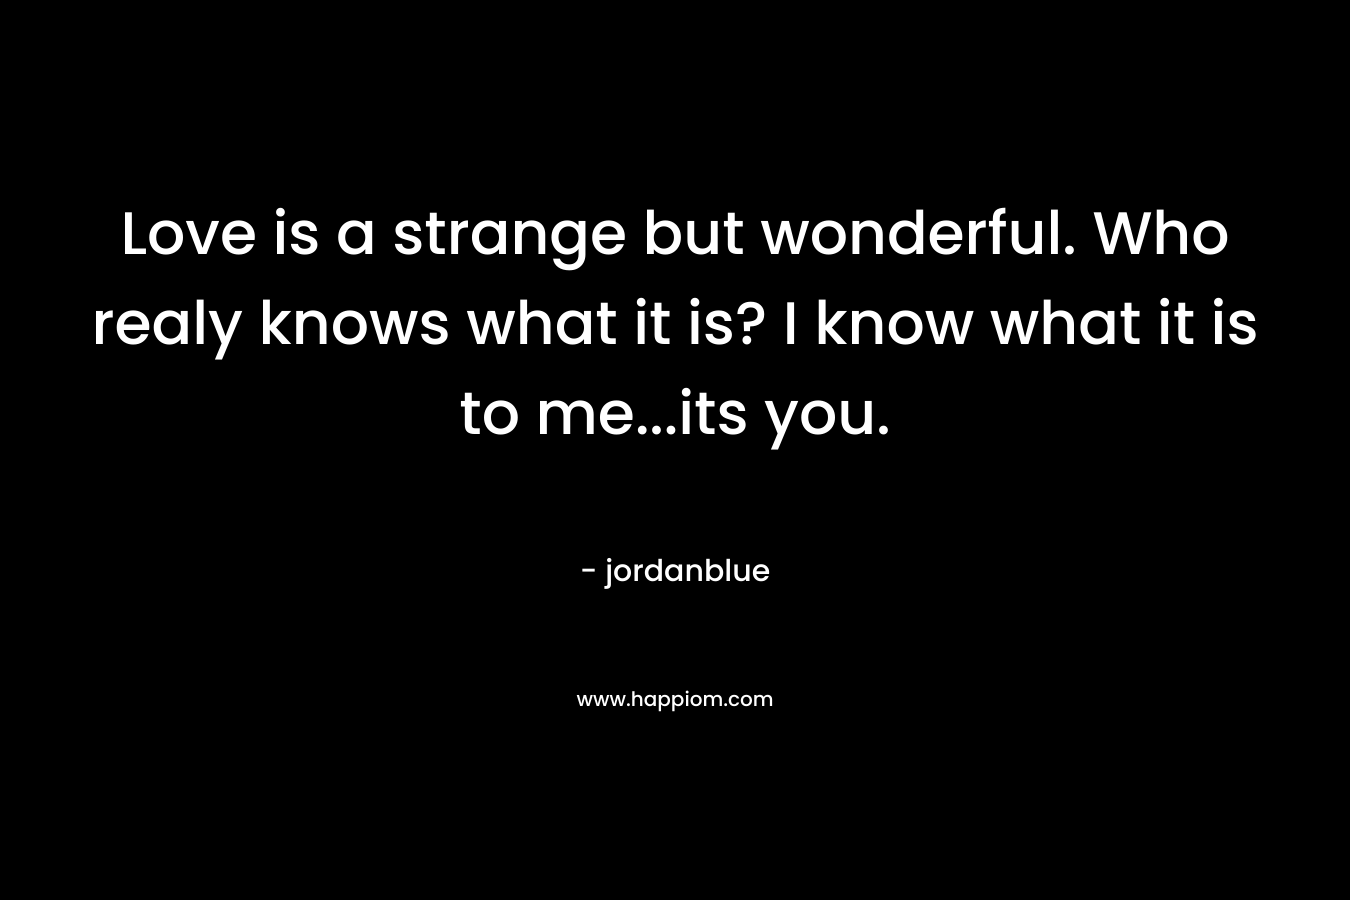 Love is a strange but wonderful. Who realy knows what it is? I know what it is to me...its you.